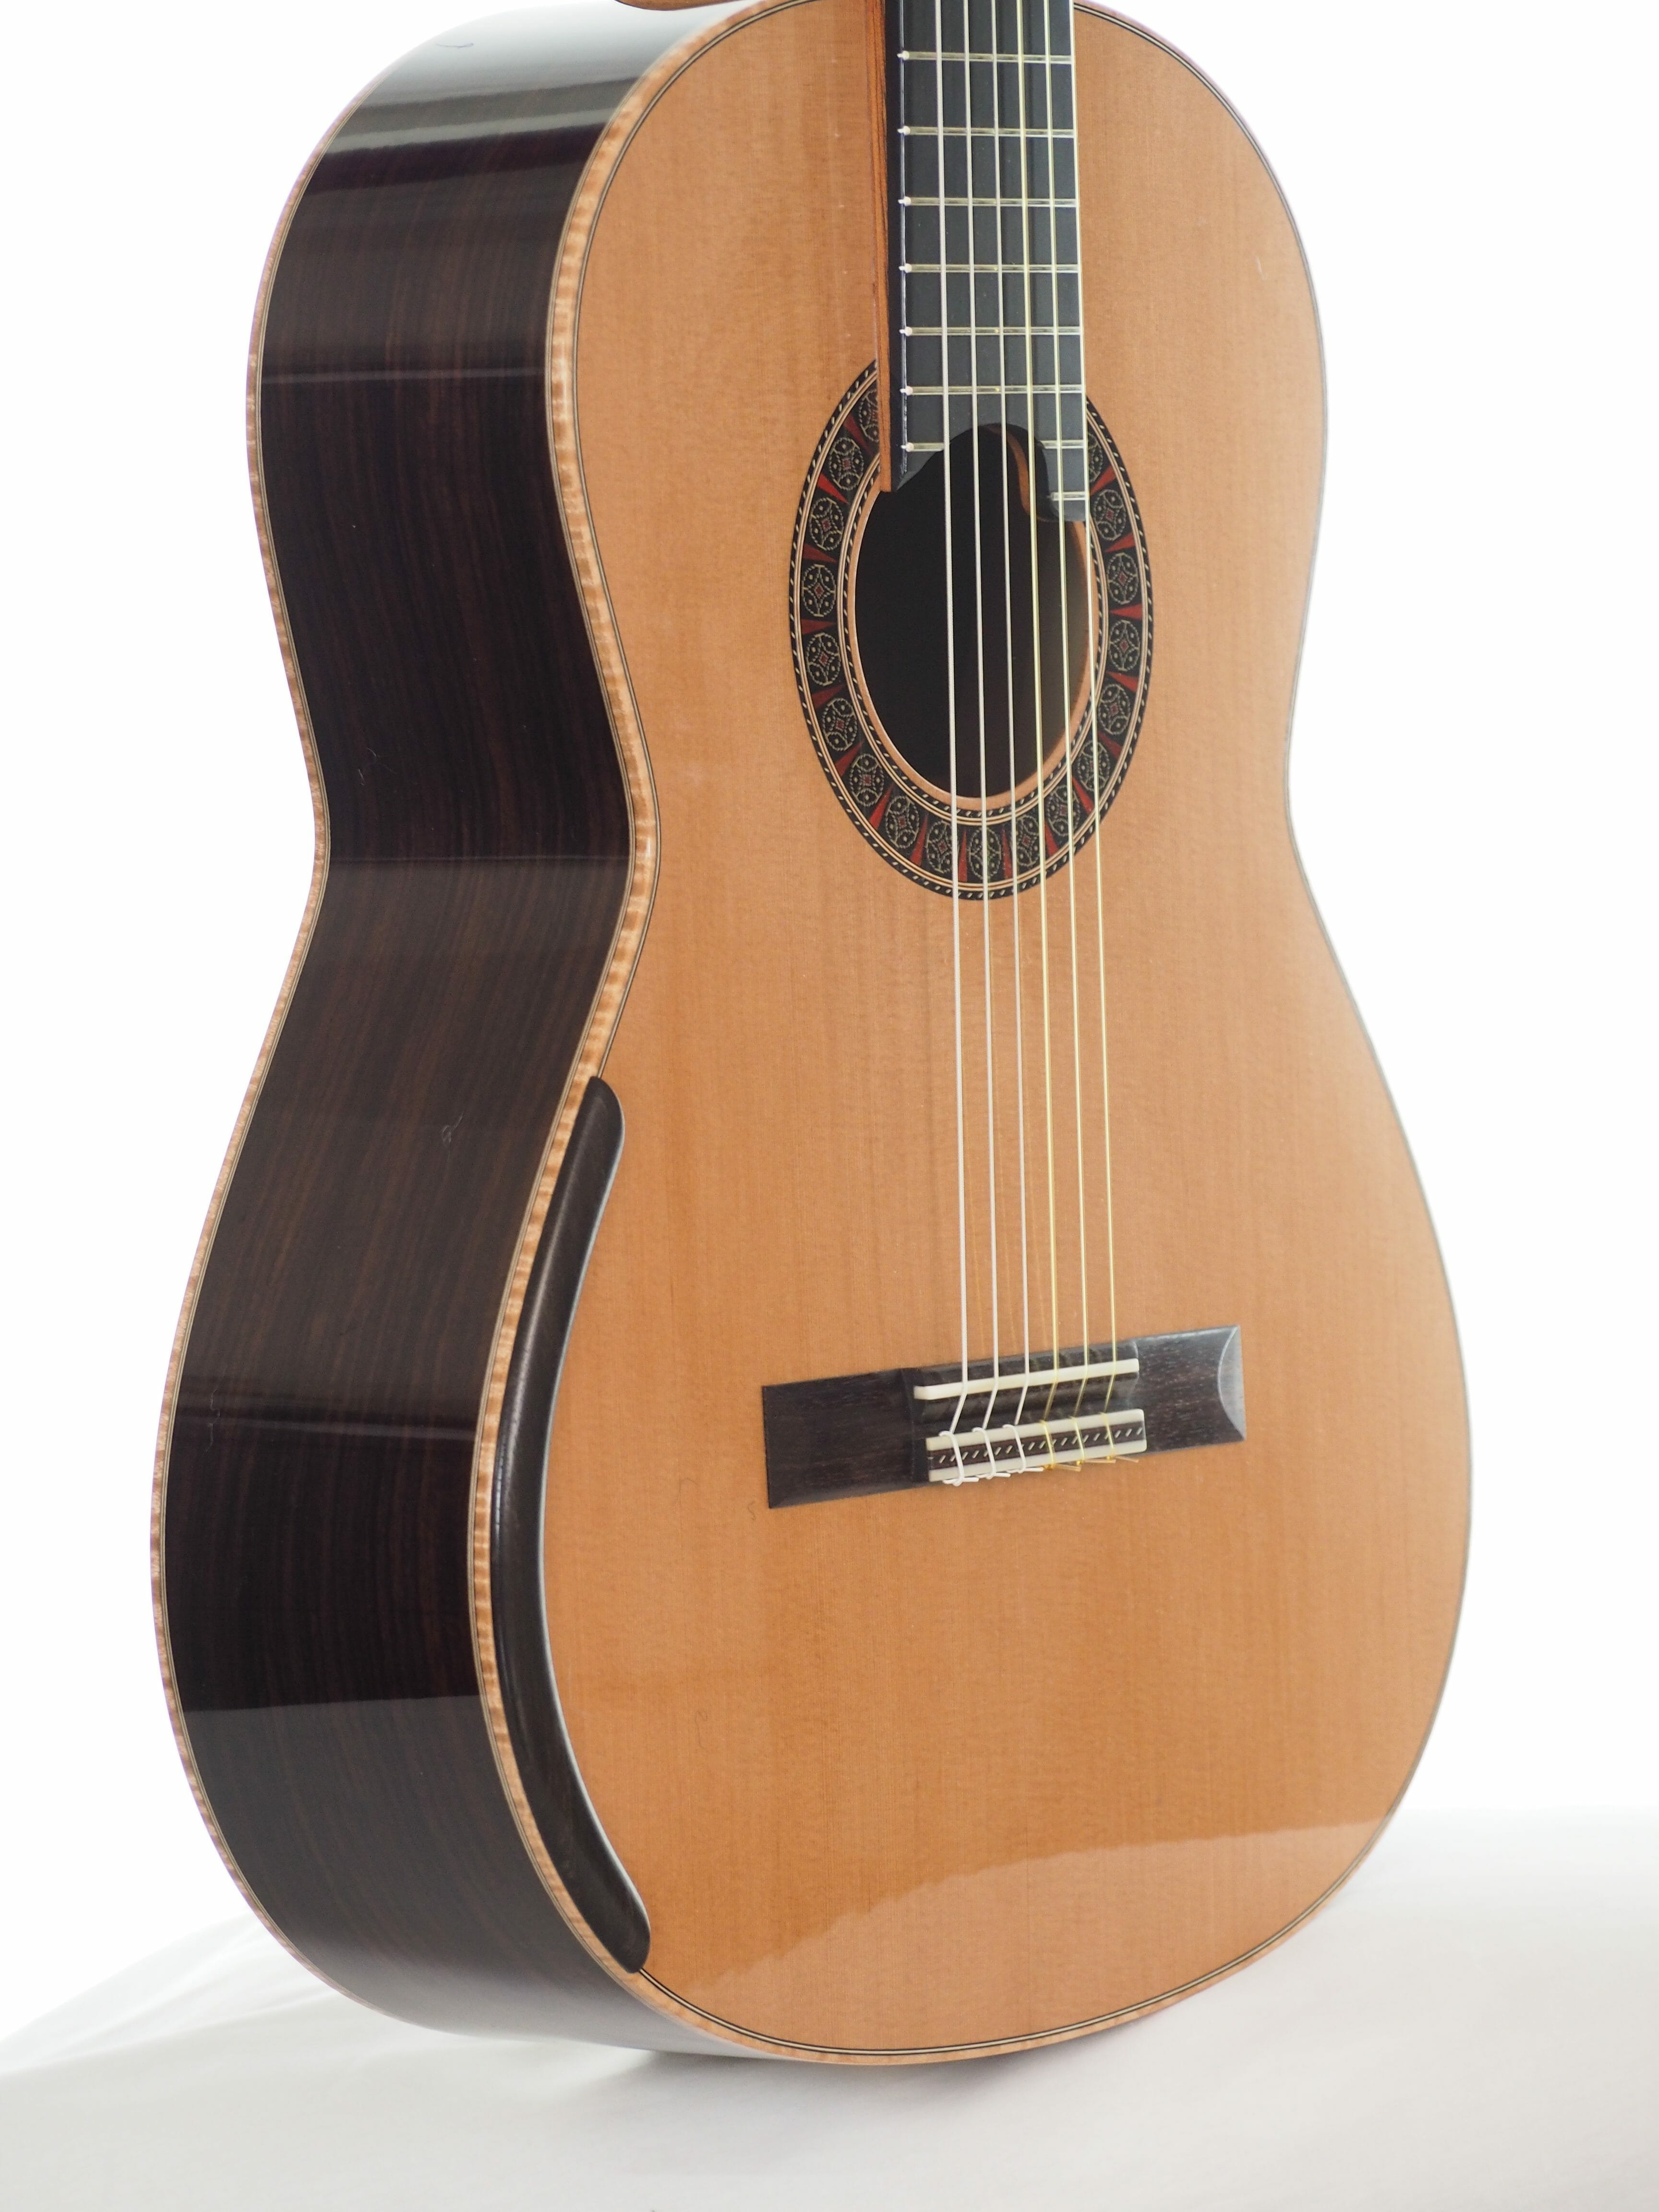 Martin Blackwell n°135 2016 - Canada - Guitare classique luthier